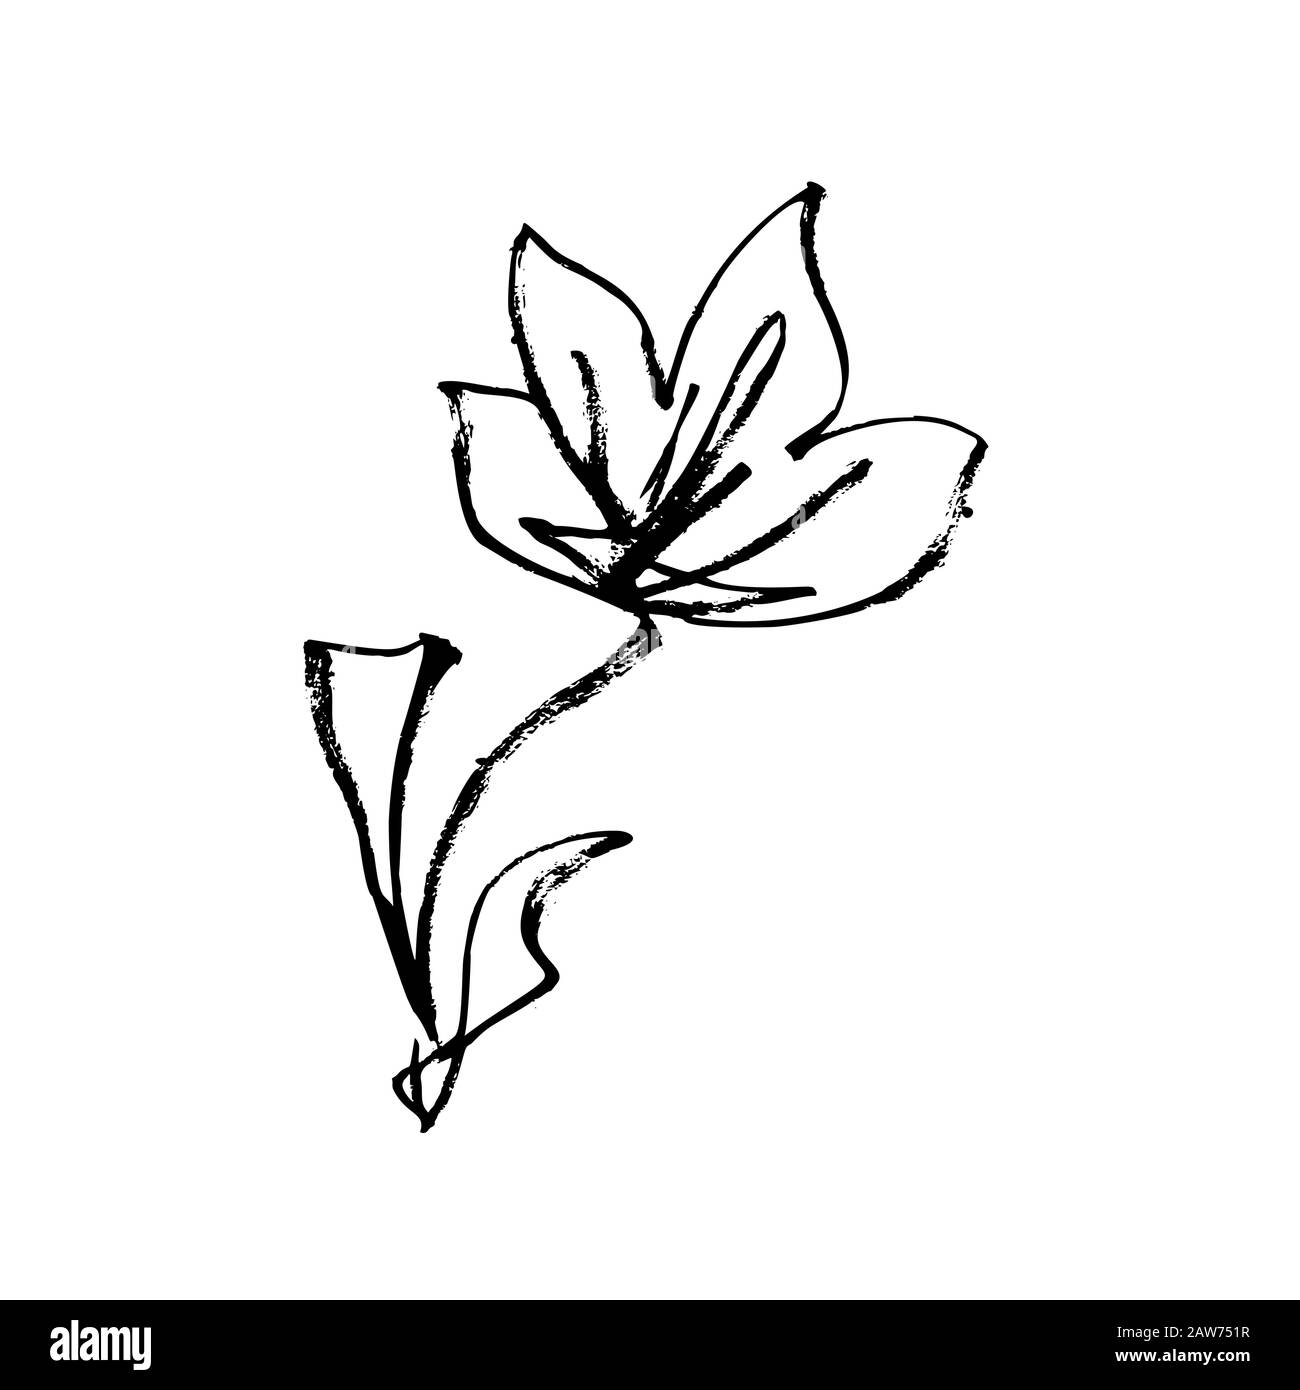 Flower ink paint hand drawn and Japanese calligraphy art style, vector isolated line design. Japanese flower, plum blossom or Chinese apricot meihua petals decoration with ink or pencil grunge texture Stock Vector